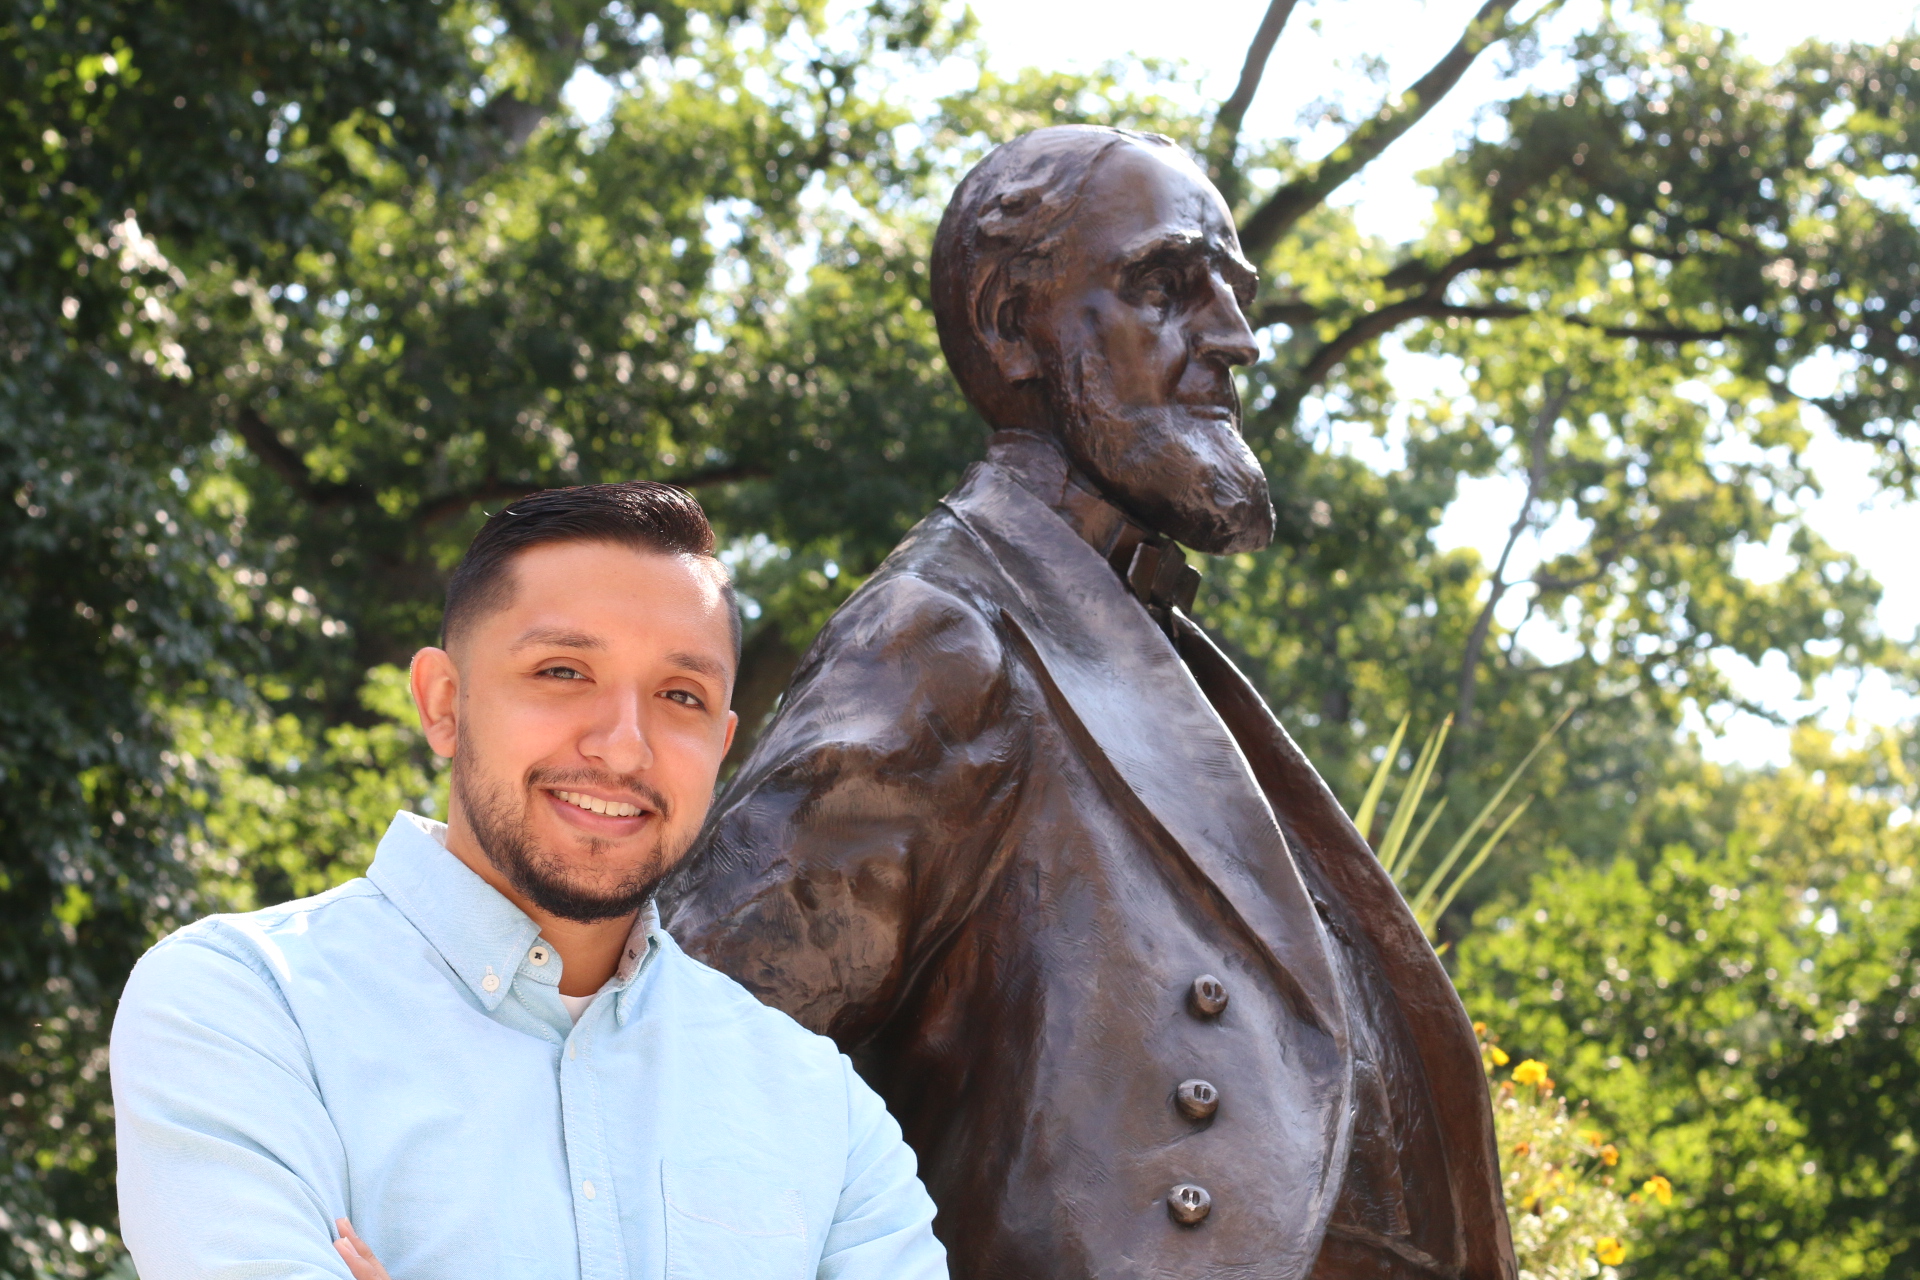 Lehigh Staff Member Chris Herrera shares a photo op with the iconic statue of founder Asa Packer, celebrating earning his master's degree in educational leadership